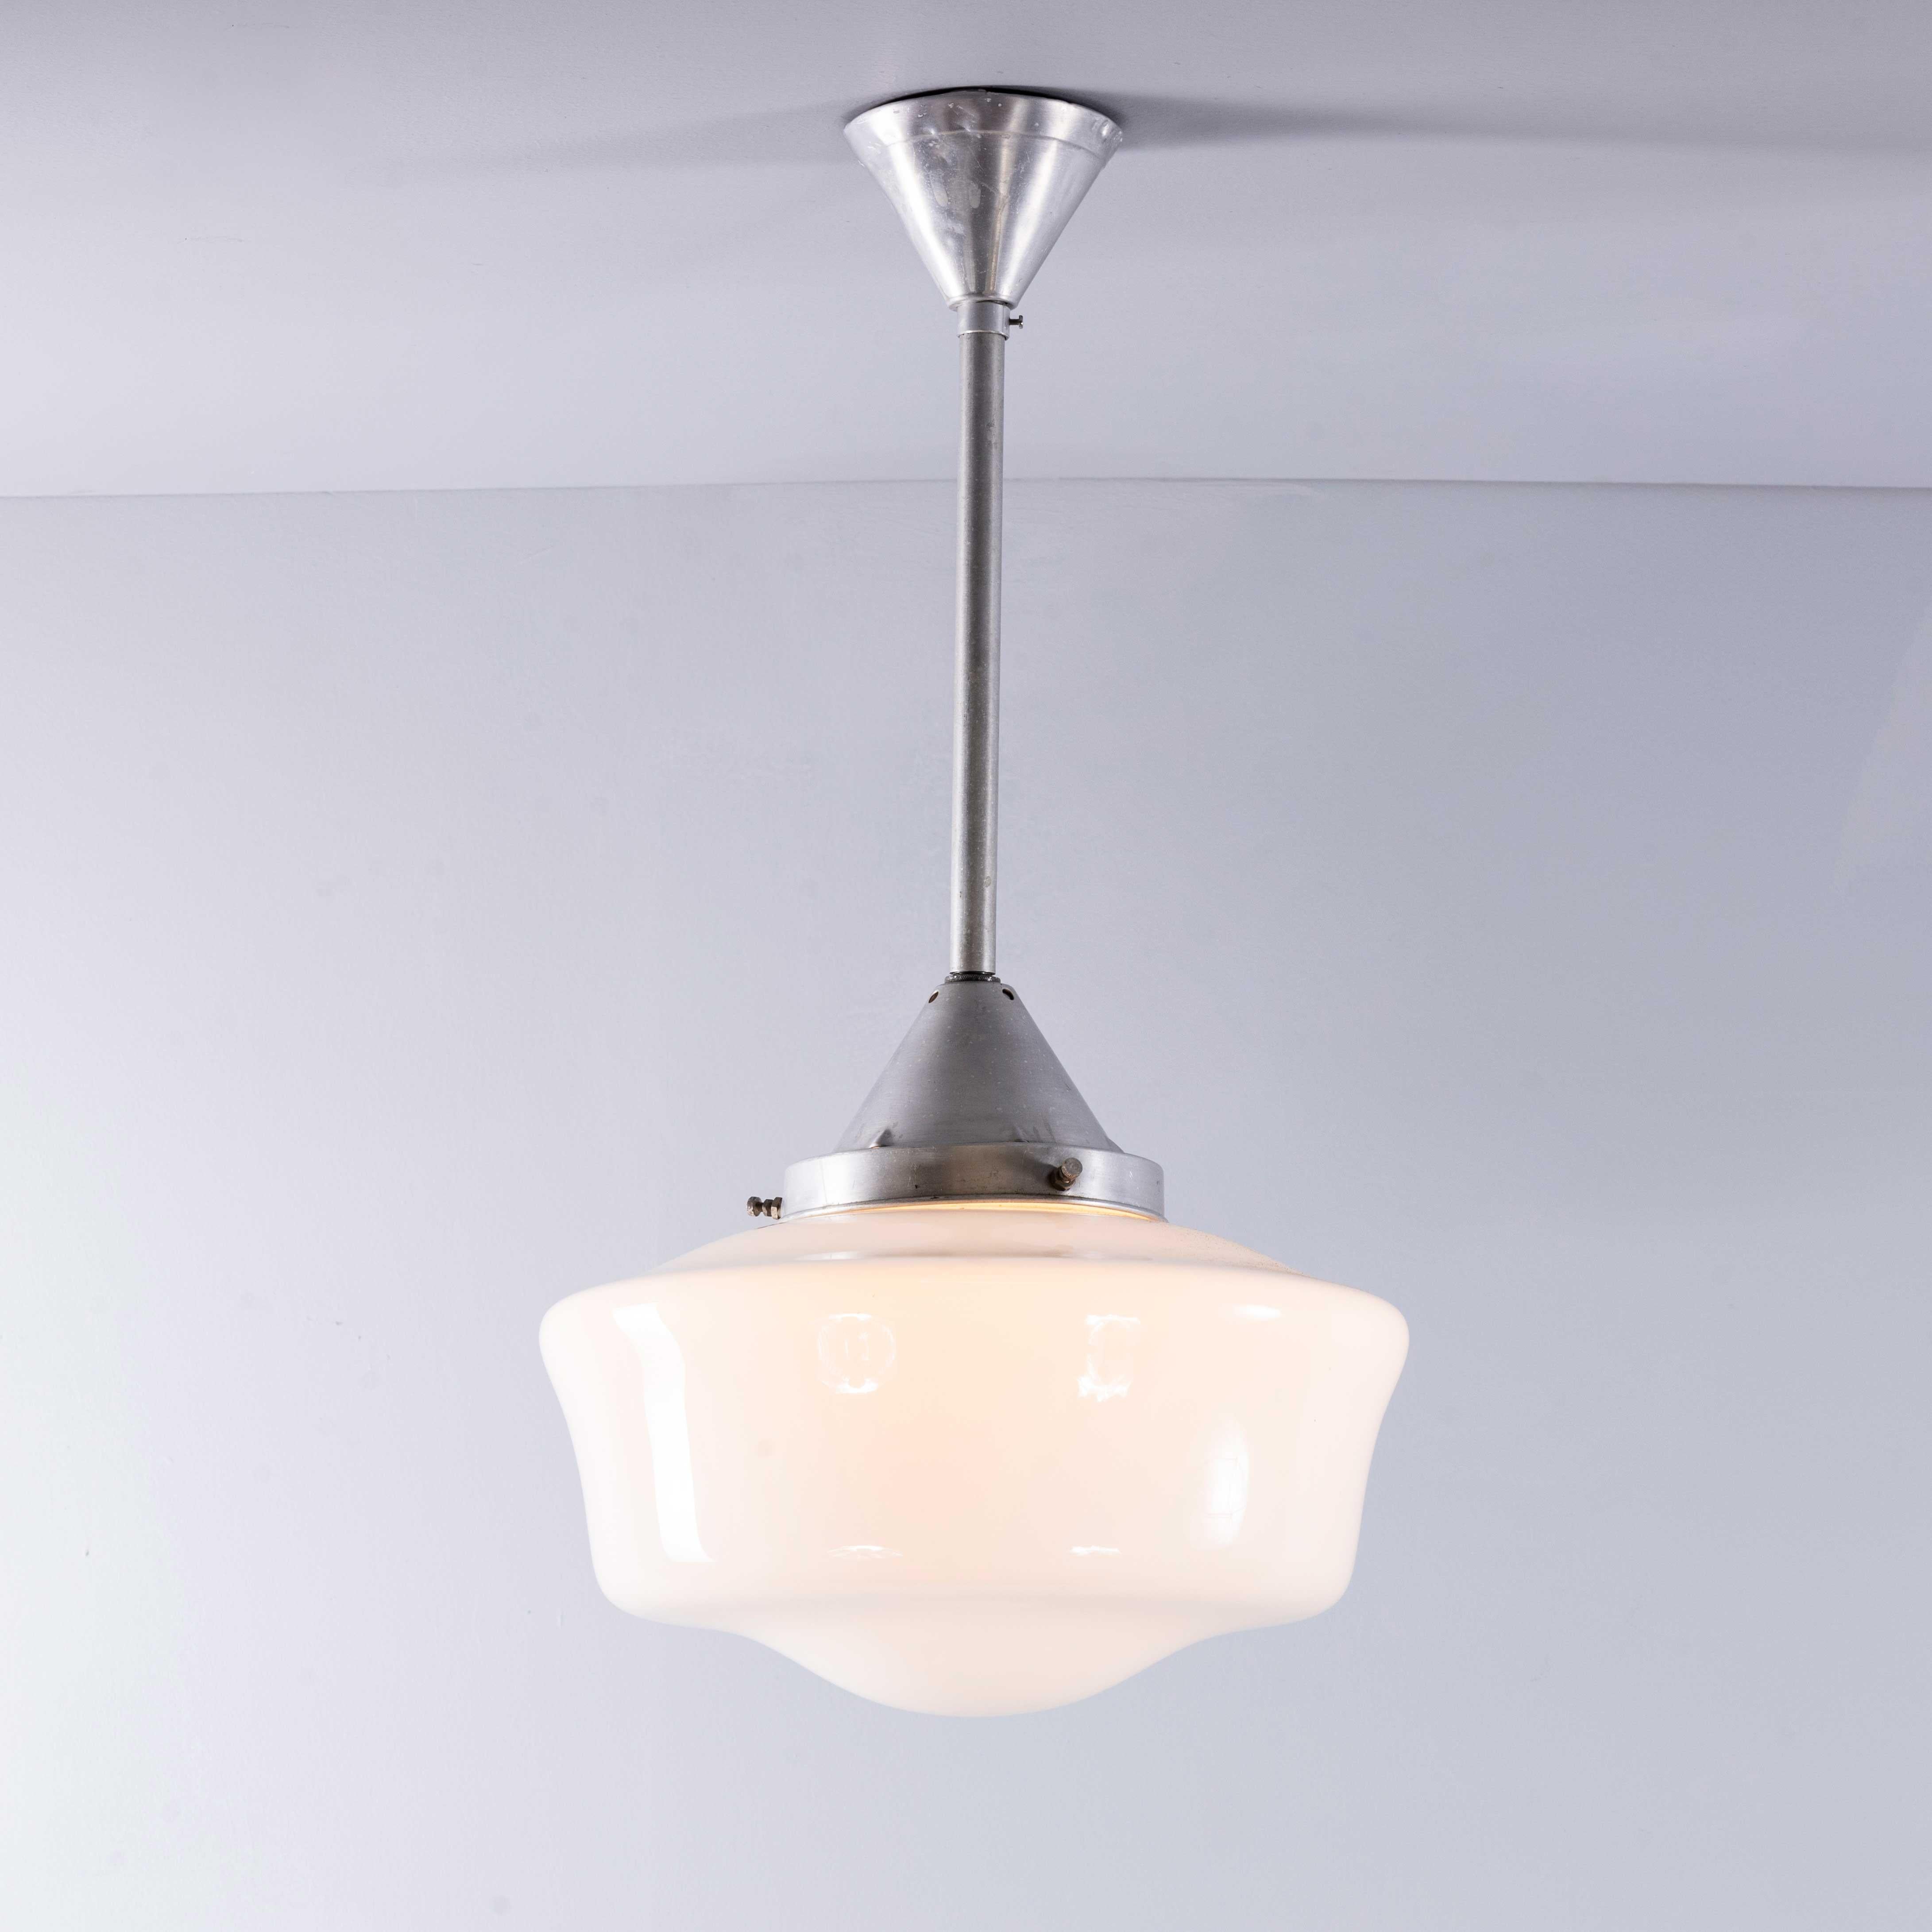 1950’s Original French Tabac Opal Glass Pendant Lamp – Single (958.7)
1950’s Original French Tabac Opal Glass Pendant Lamp – Single. Stunning original pendant lamp from a Tabac in France. The opal shade is the original glass and the galleries and